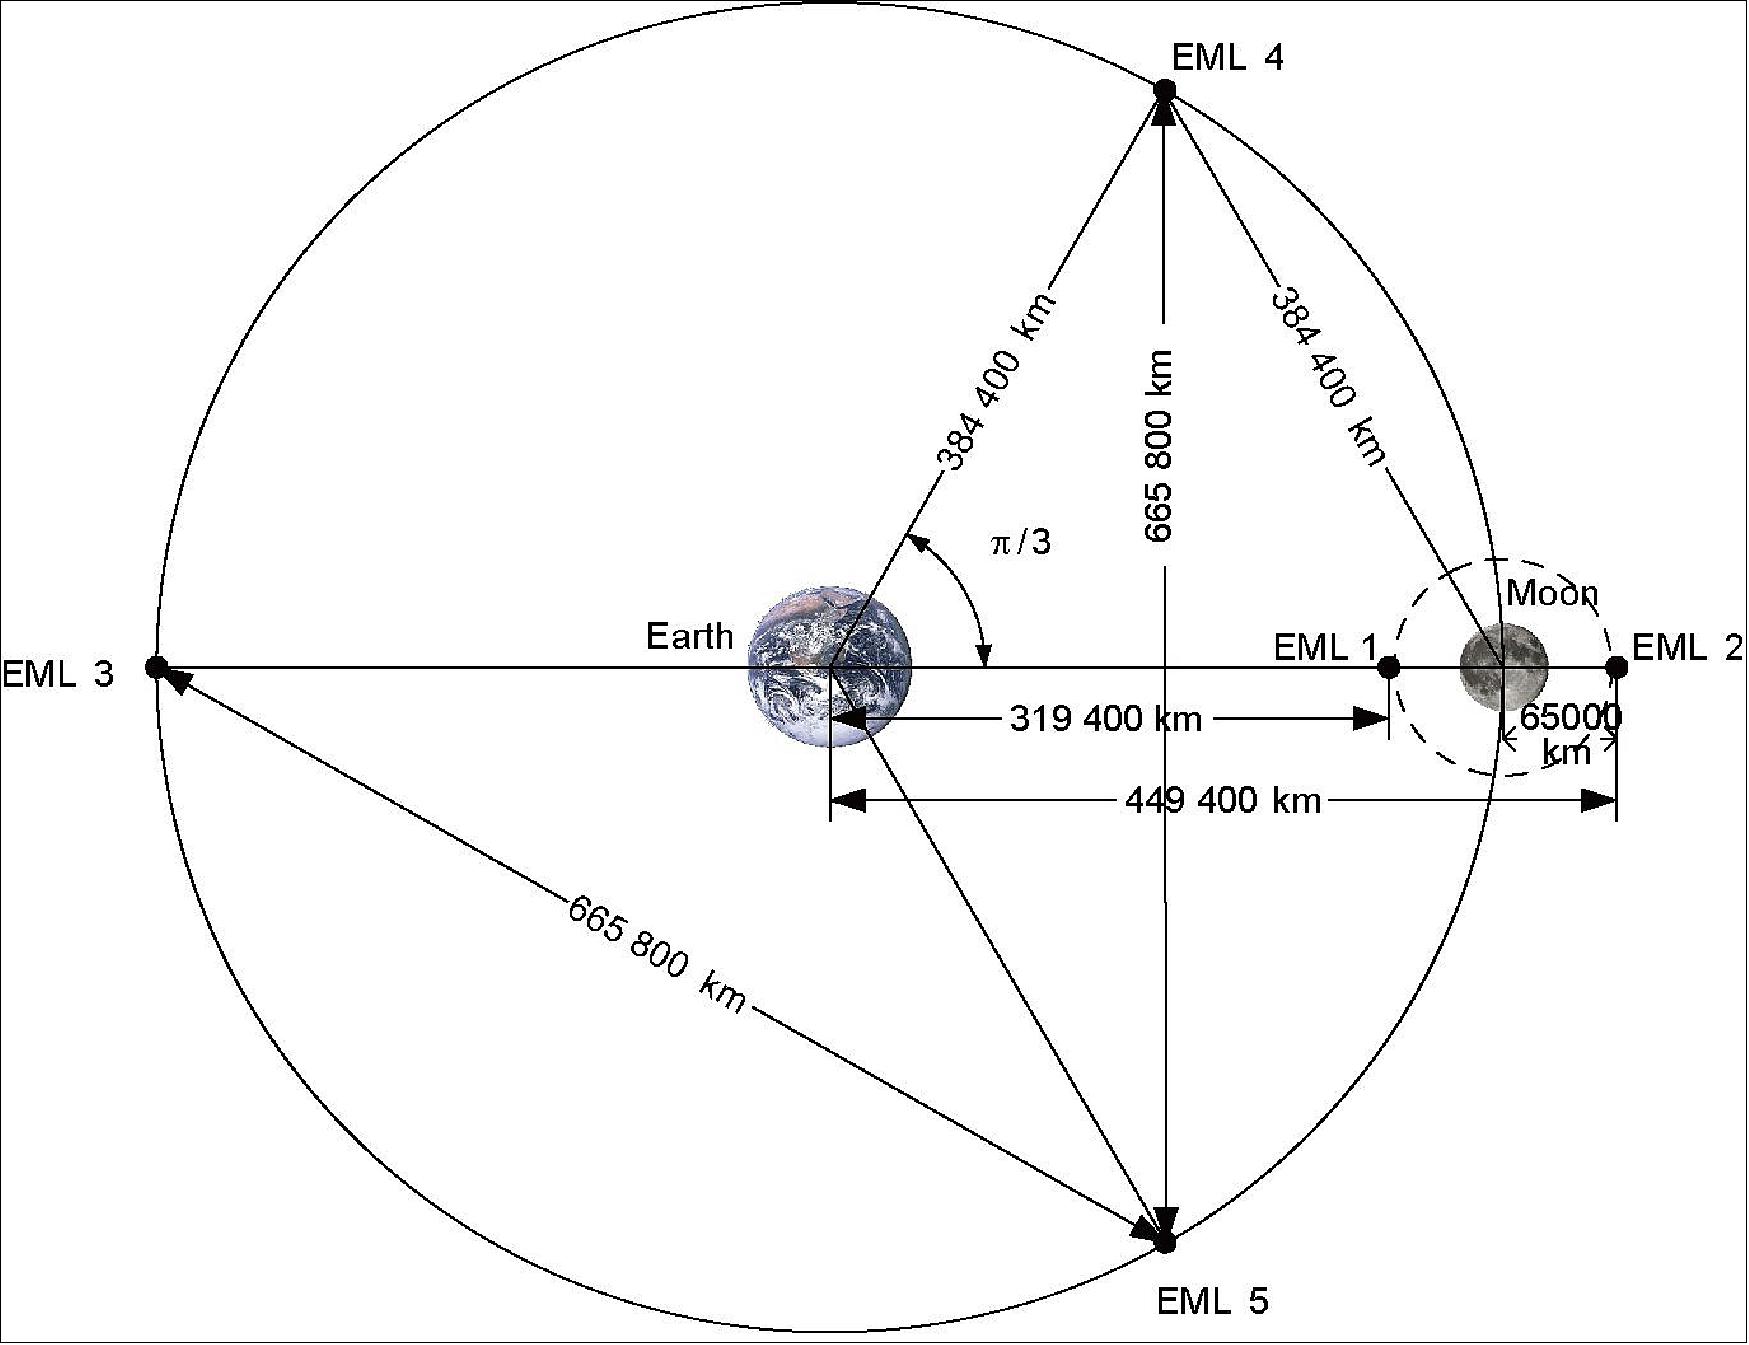 Figure 45: The map of the EML (Earth-Moon Liberation) points (image credit: CAST)